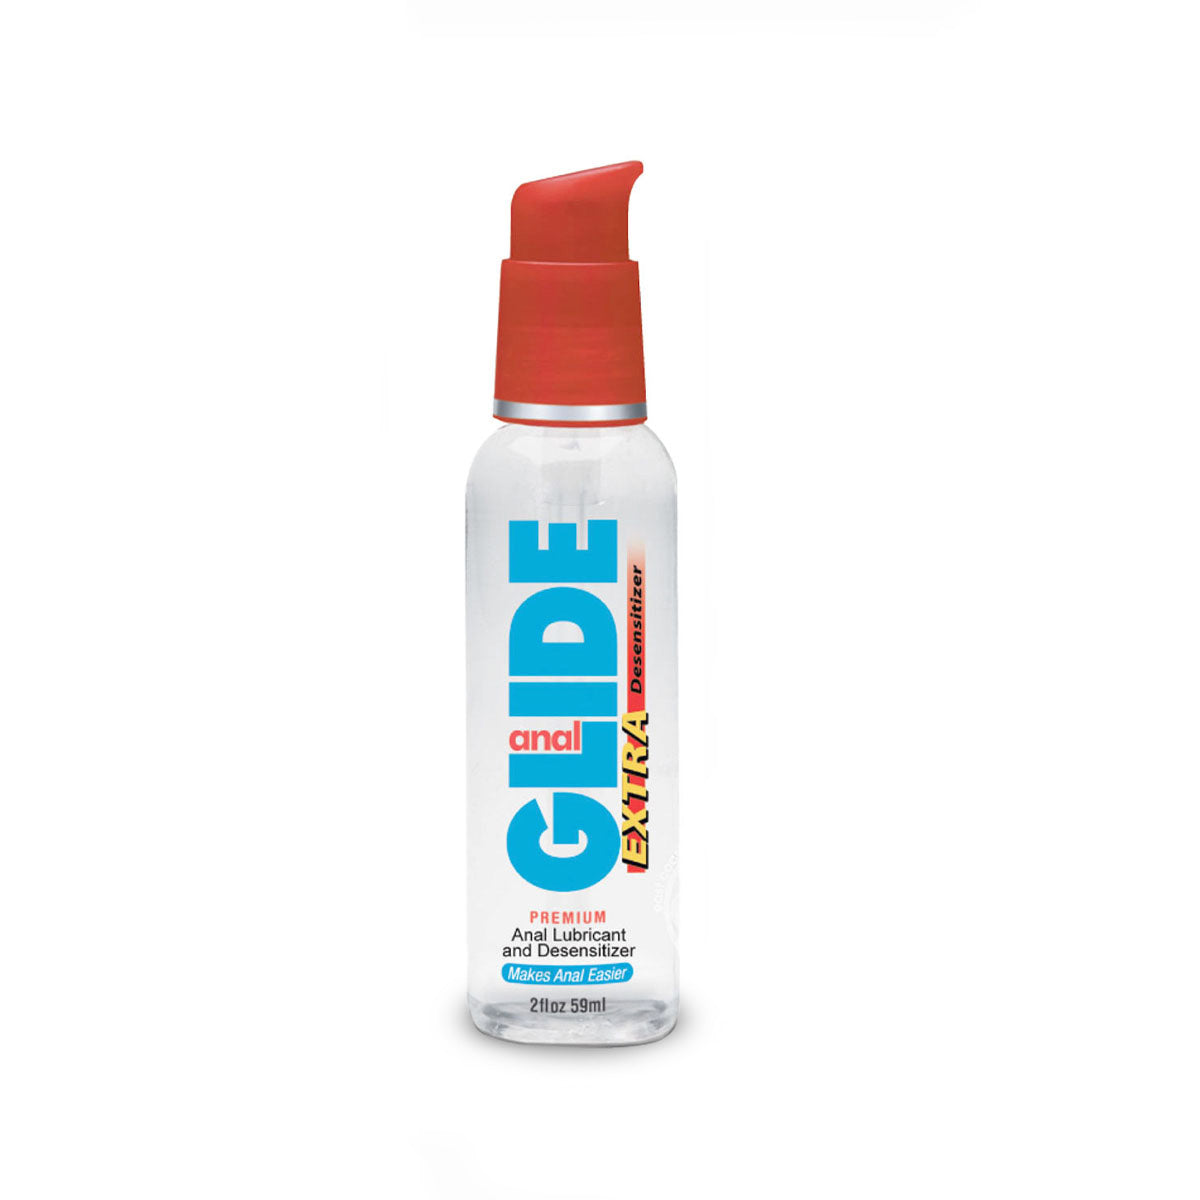 Anal Glide Extra Desensitizer Desensitizing Personal Anal Lube Lubricant